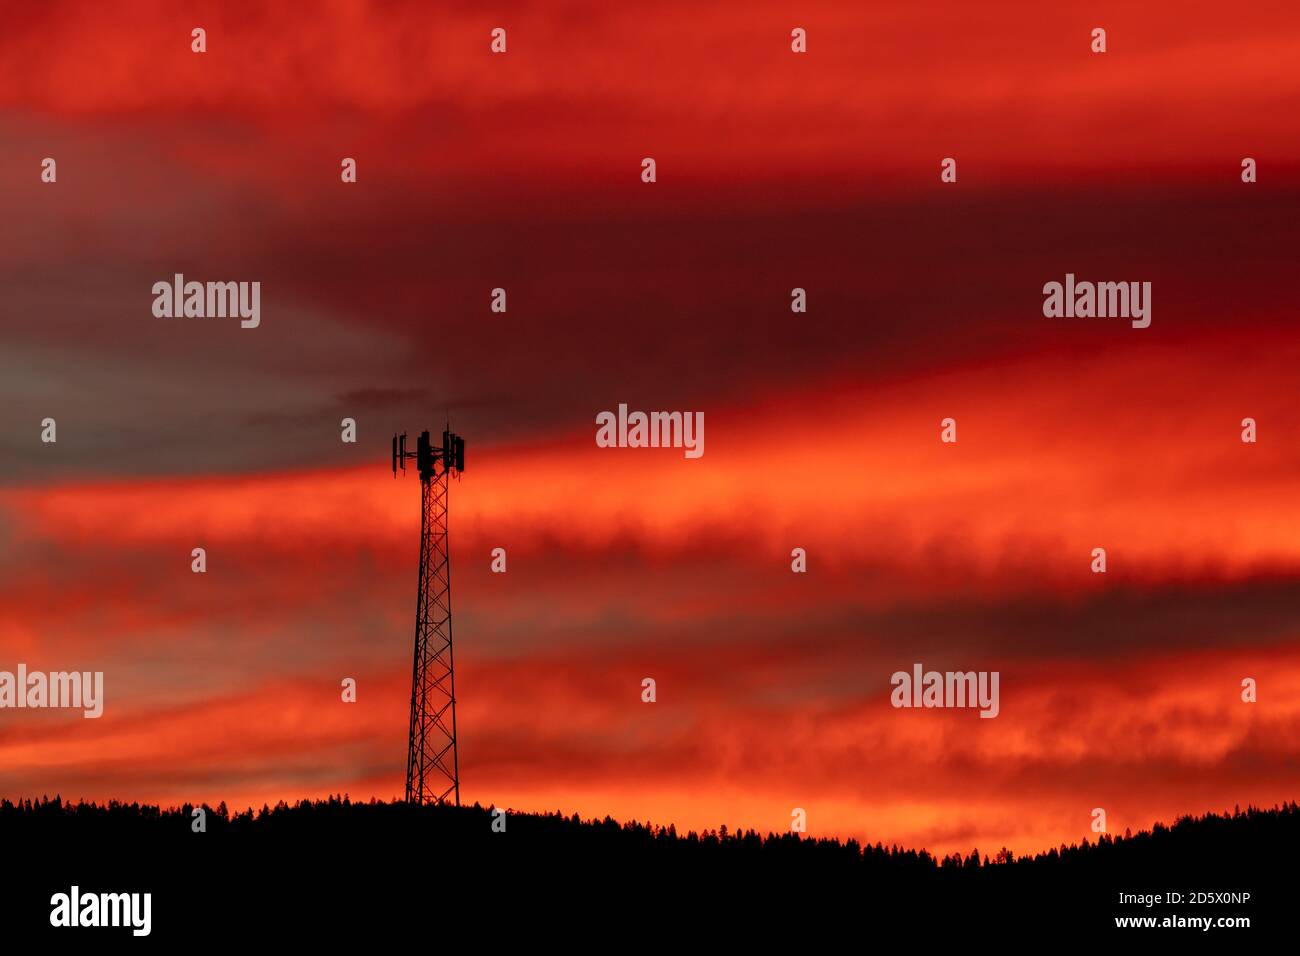 Beautiful Clouds in this Cell Tower Sunrise Landscape. Oregon, Ashland, Cascade Siskiyou National Monument, Fall Stock Photo